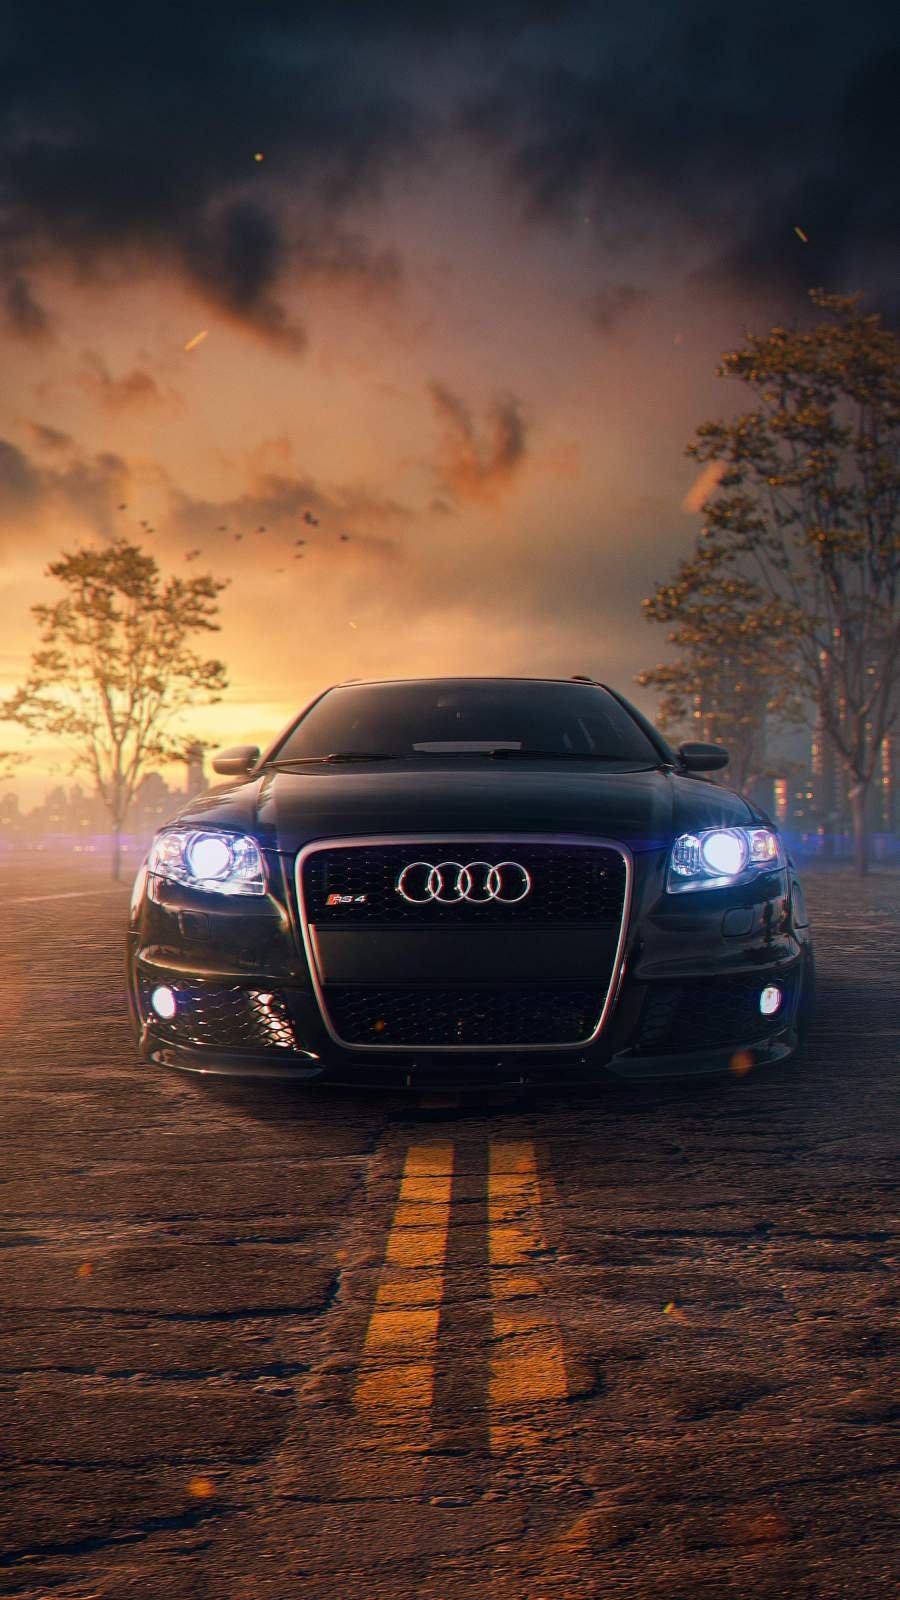 23 Incredible And Fascinating Audi Wallpapers To Check Out | Audi r8  wallpaper, Sports car wallpaper, 4 door sports cars